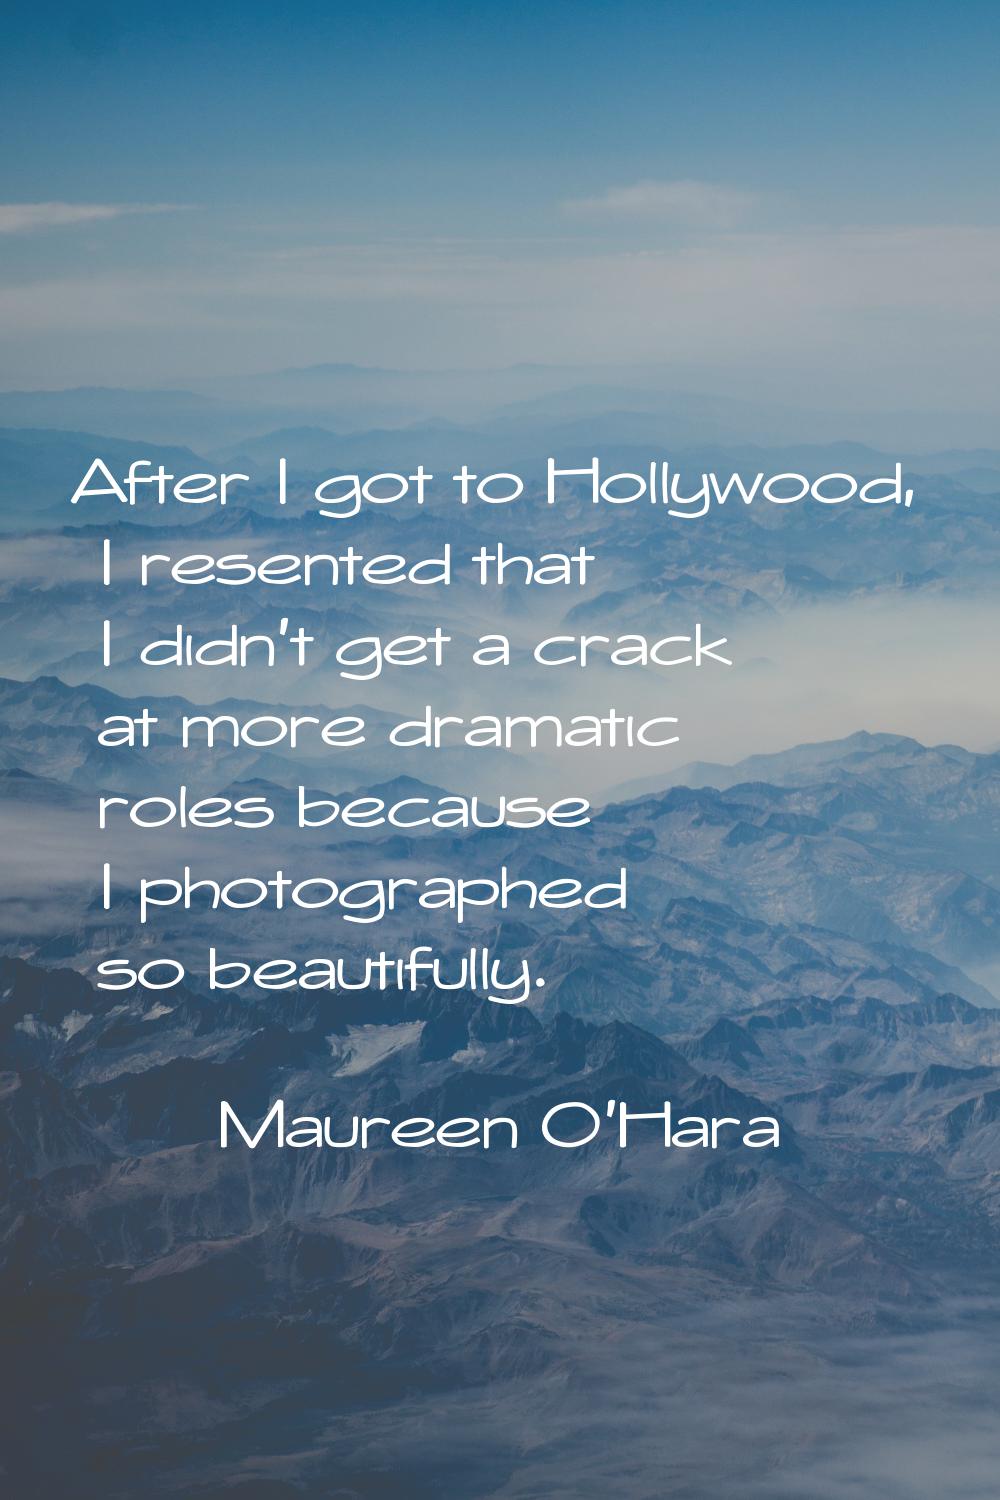 After I got to Hollywood, I resented that I didn't get a crack at more dramatic roles because I pho